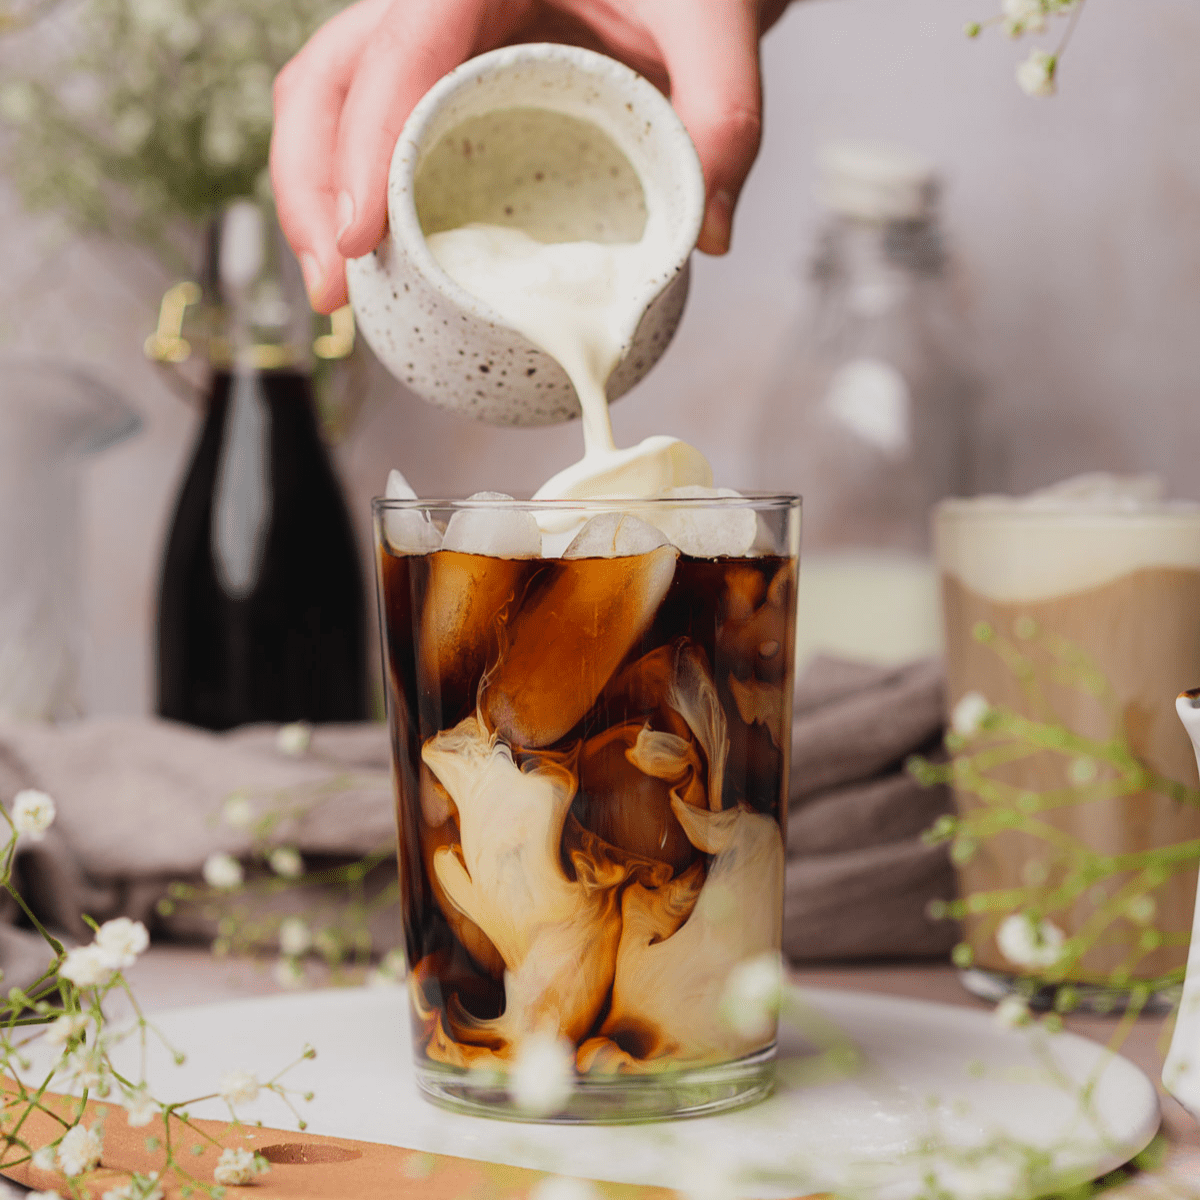 https://afullliving.com/wp-content/uploads/2022/03/How-to-make-sweet-cream-cold-foam-1200-x-1200.png